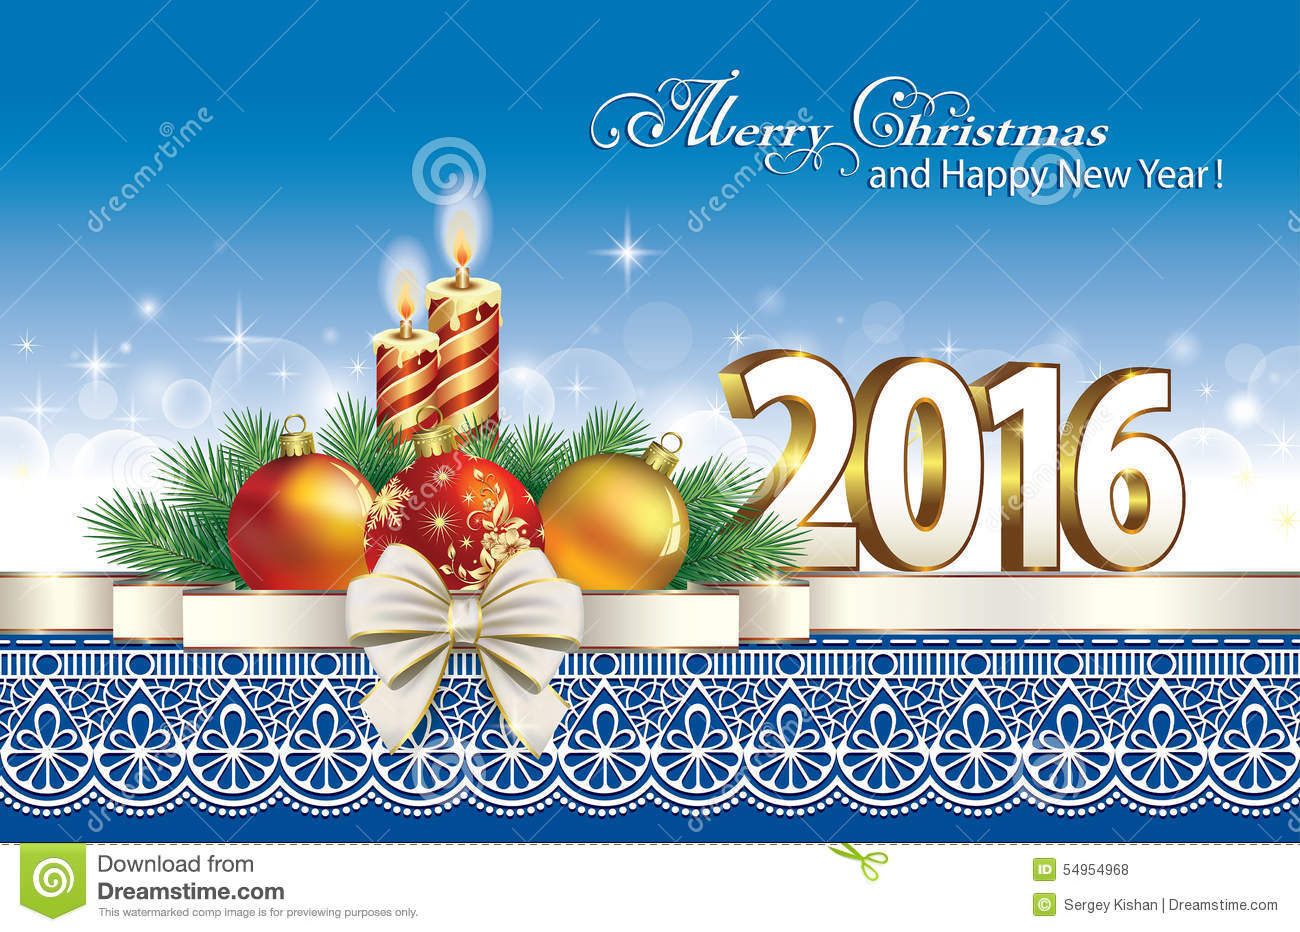 Merry Christmas And Happy New Year 2016 Picture